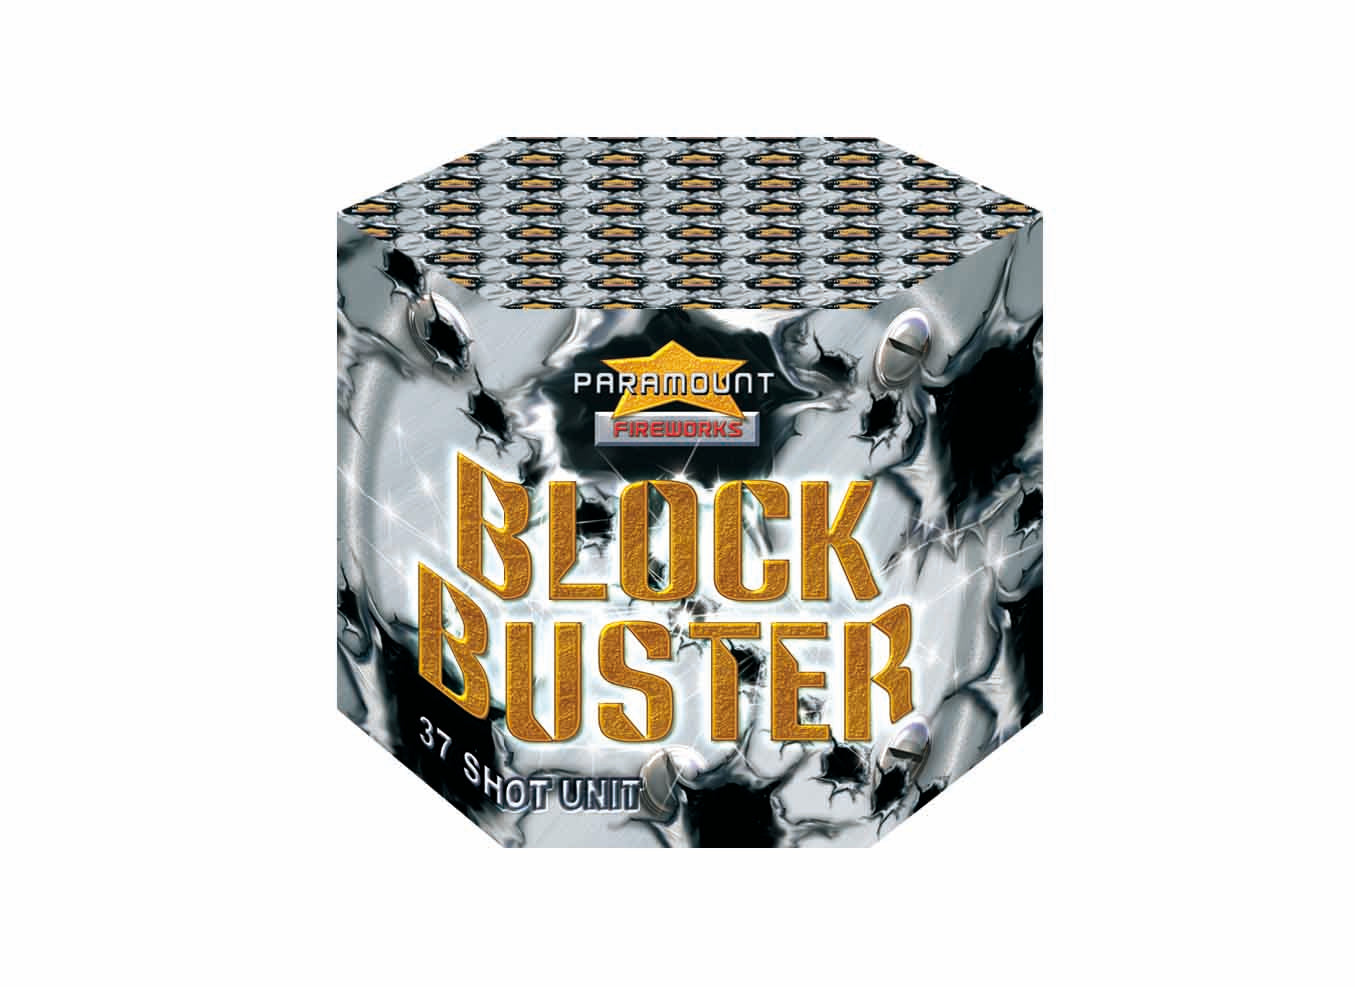 New for 08: Block Buster